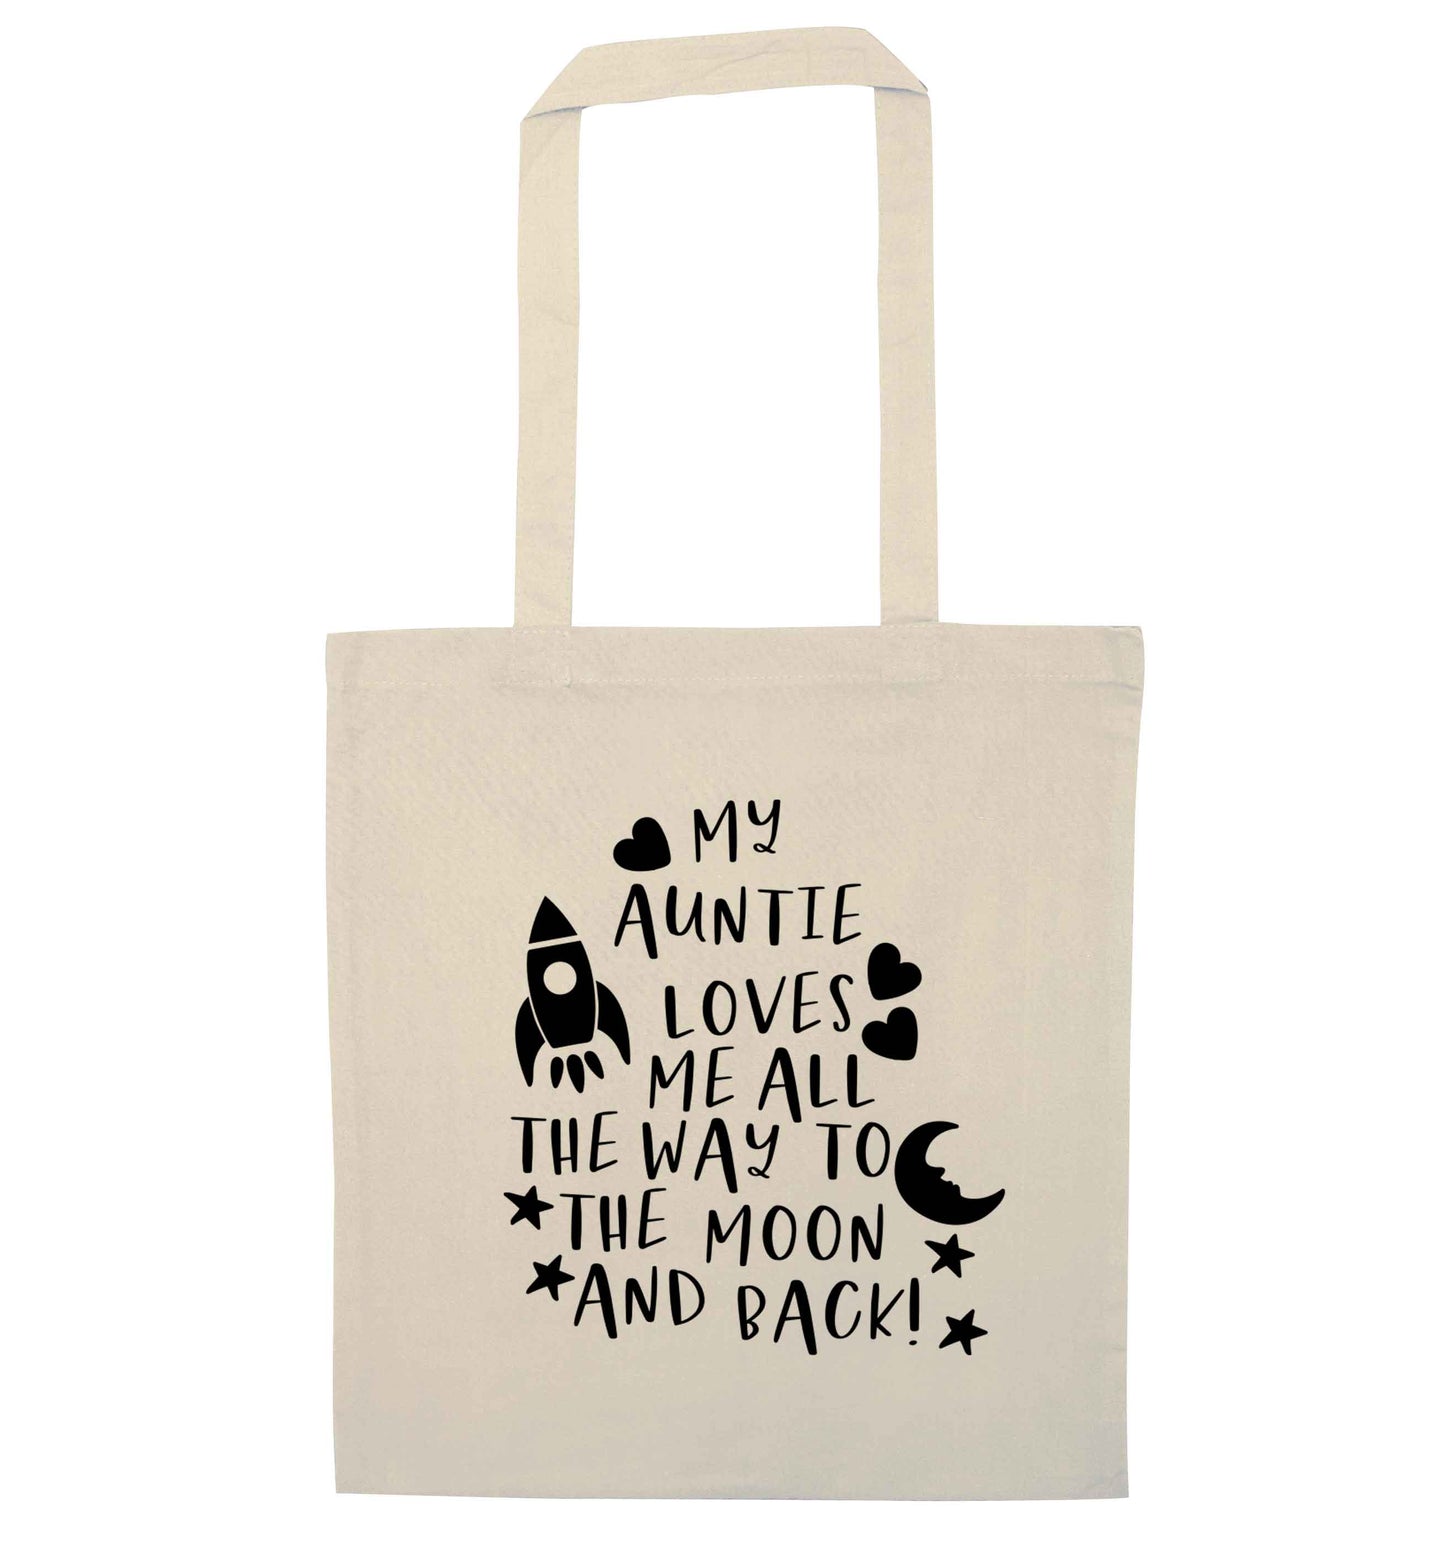 My auntie loves me all the way to the moon and back natural tote bag